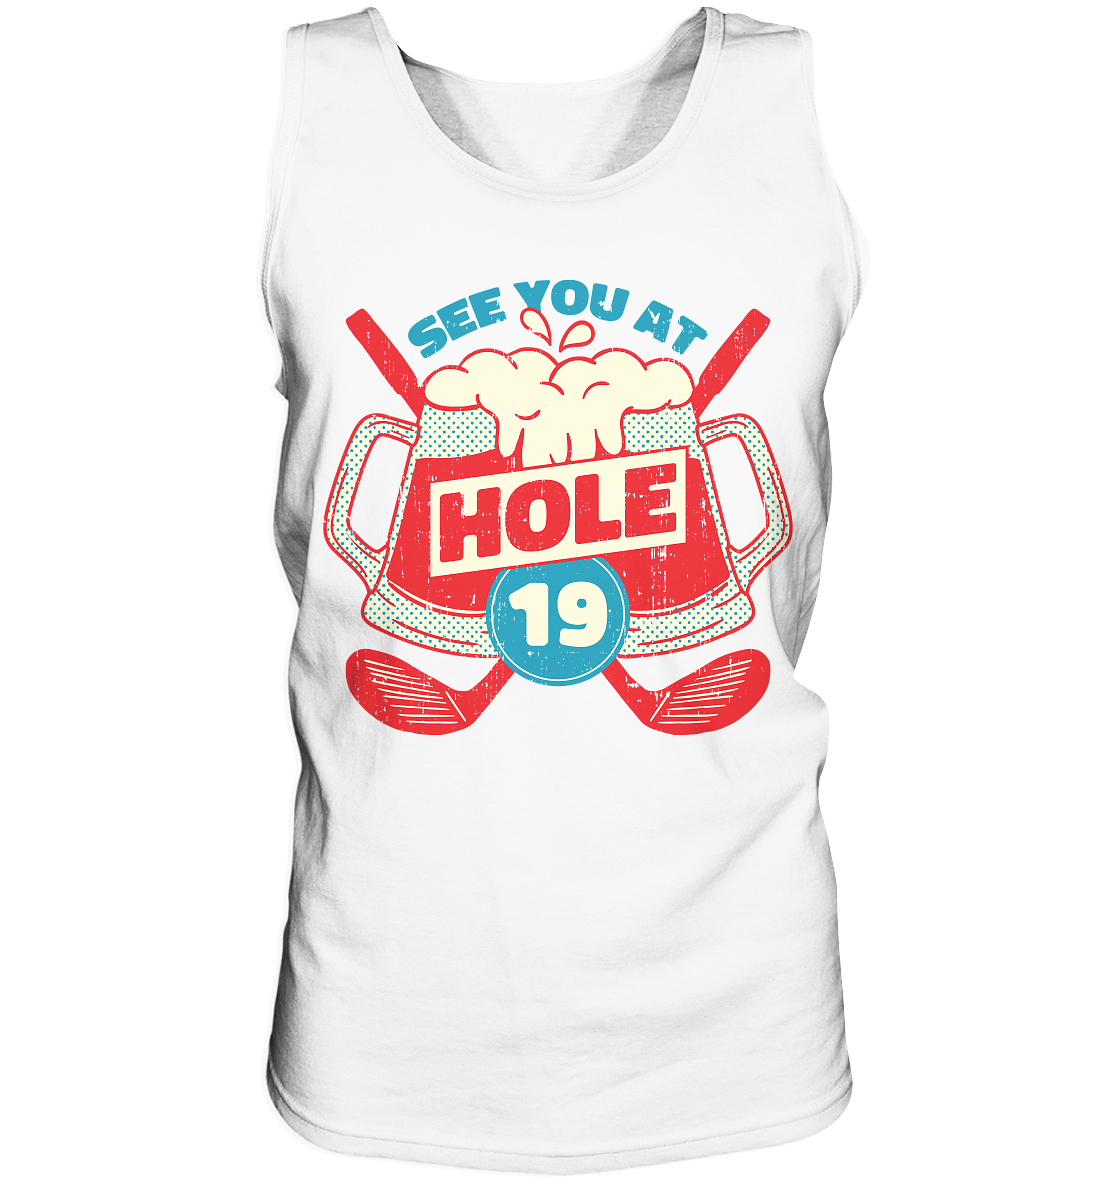 Golf ,See you at Hole 19 , Wir sehen uns bei Loch 19 - Tank-Top